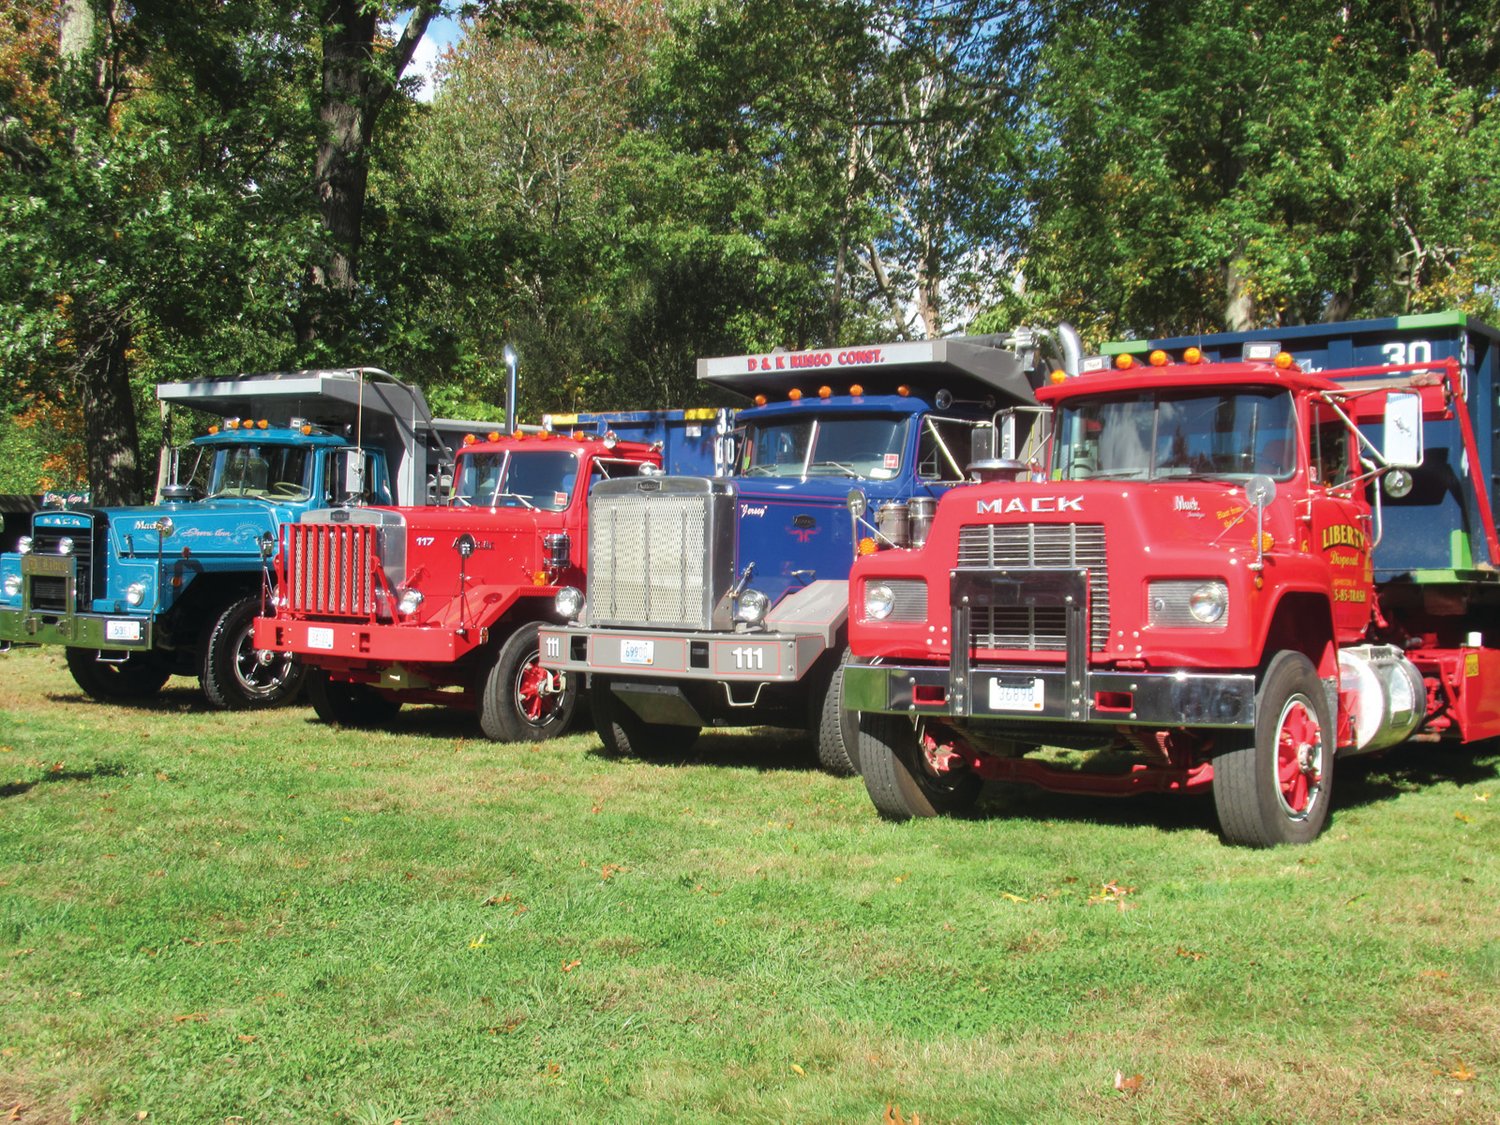 HEAVY HAULERS: The famous Mack trucks, which date back many moons and were used for big construction jobs, were huge hits for young old alike who took in Sunday’s Ocean State Vintage Haulers Fall Round-up.